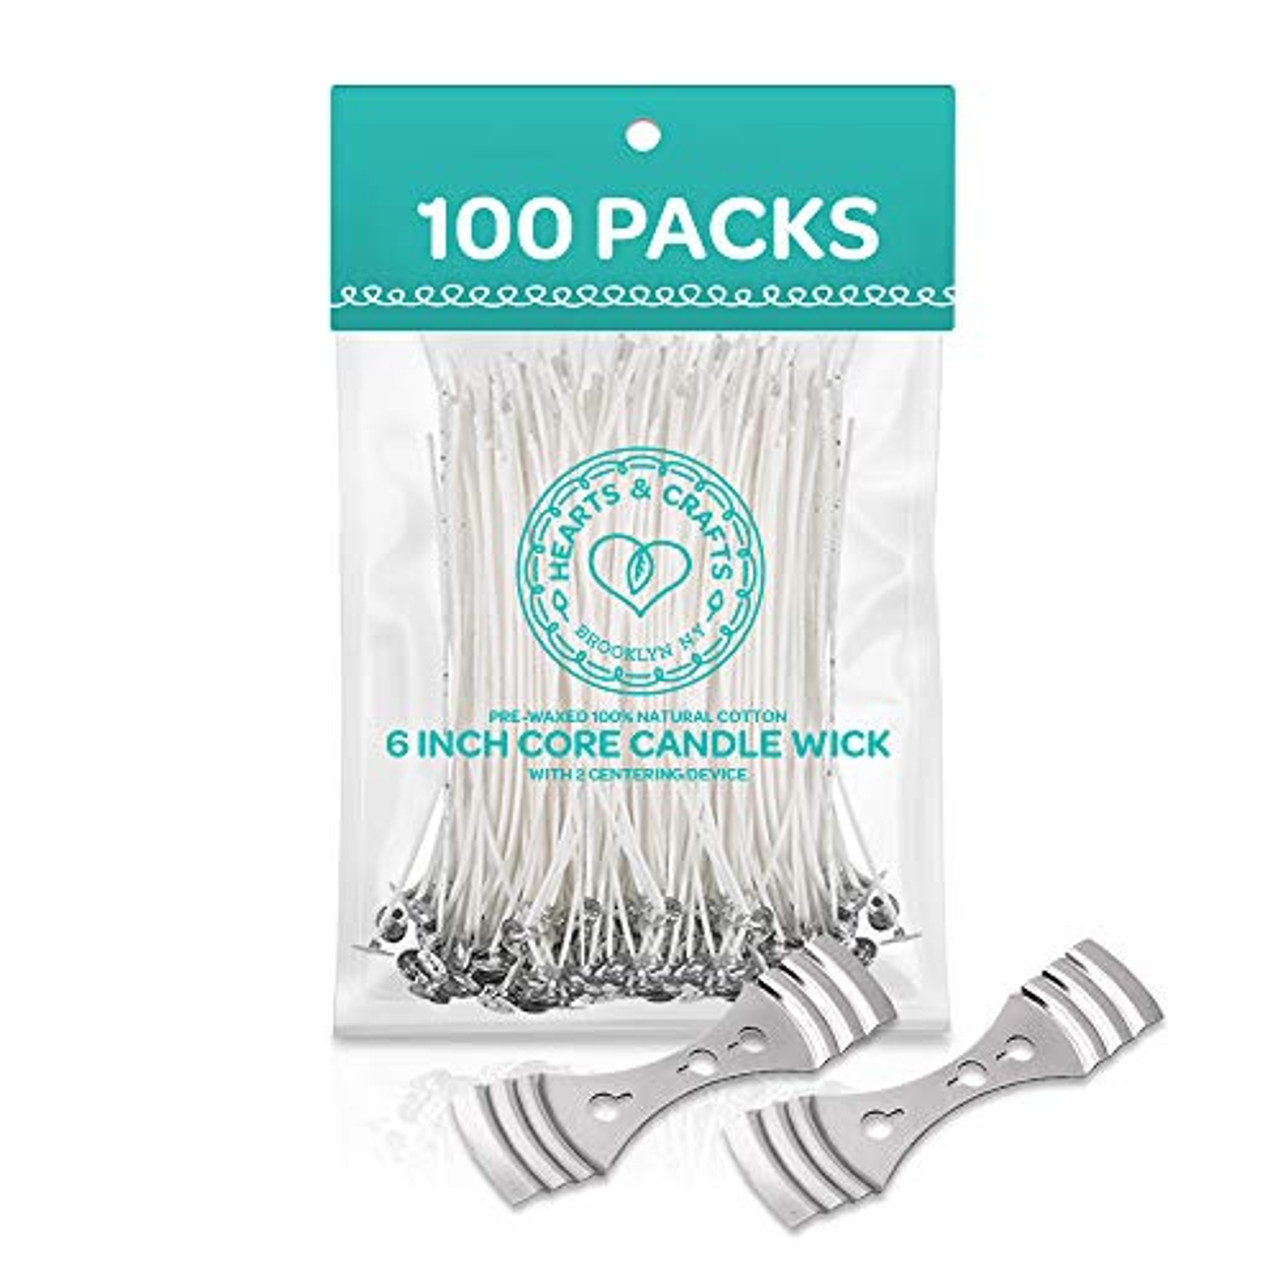 Candle Wicks - 100% Natural Cotton, Pre-Waxed, Low Smoke 6 Wicks for DIY  Candle Making, 100 Wicks Plus 2 Centering Devices